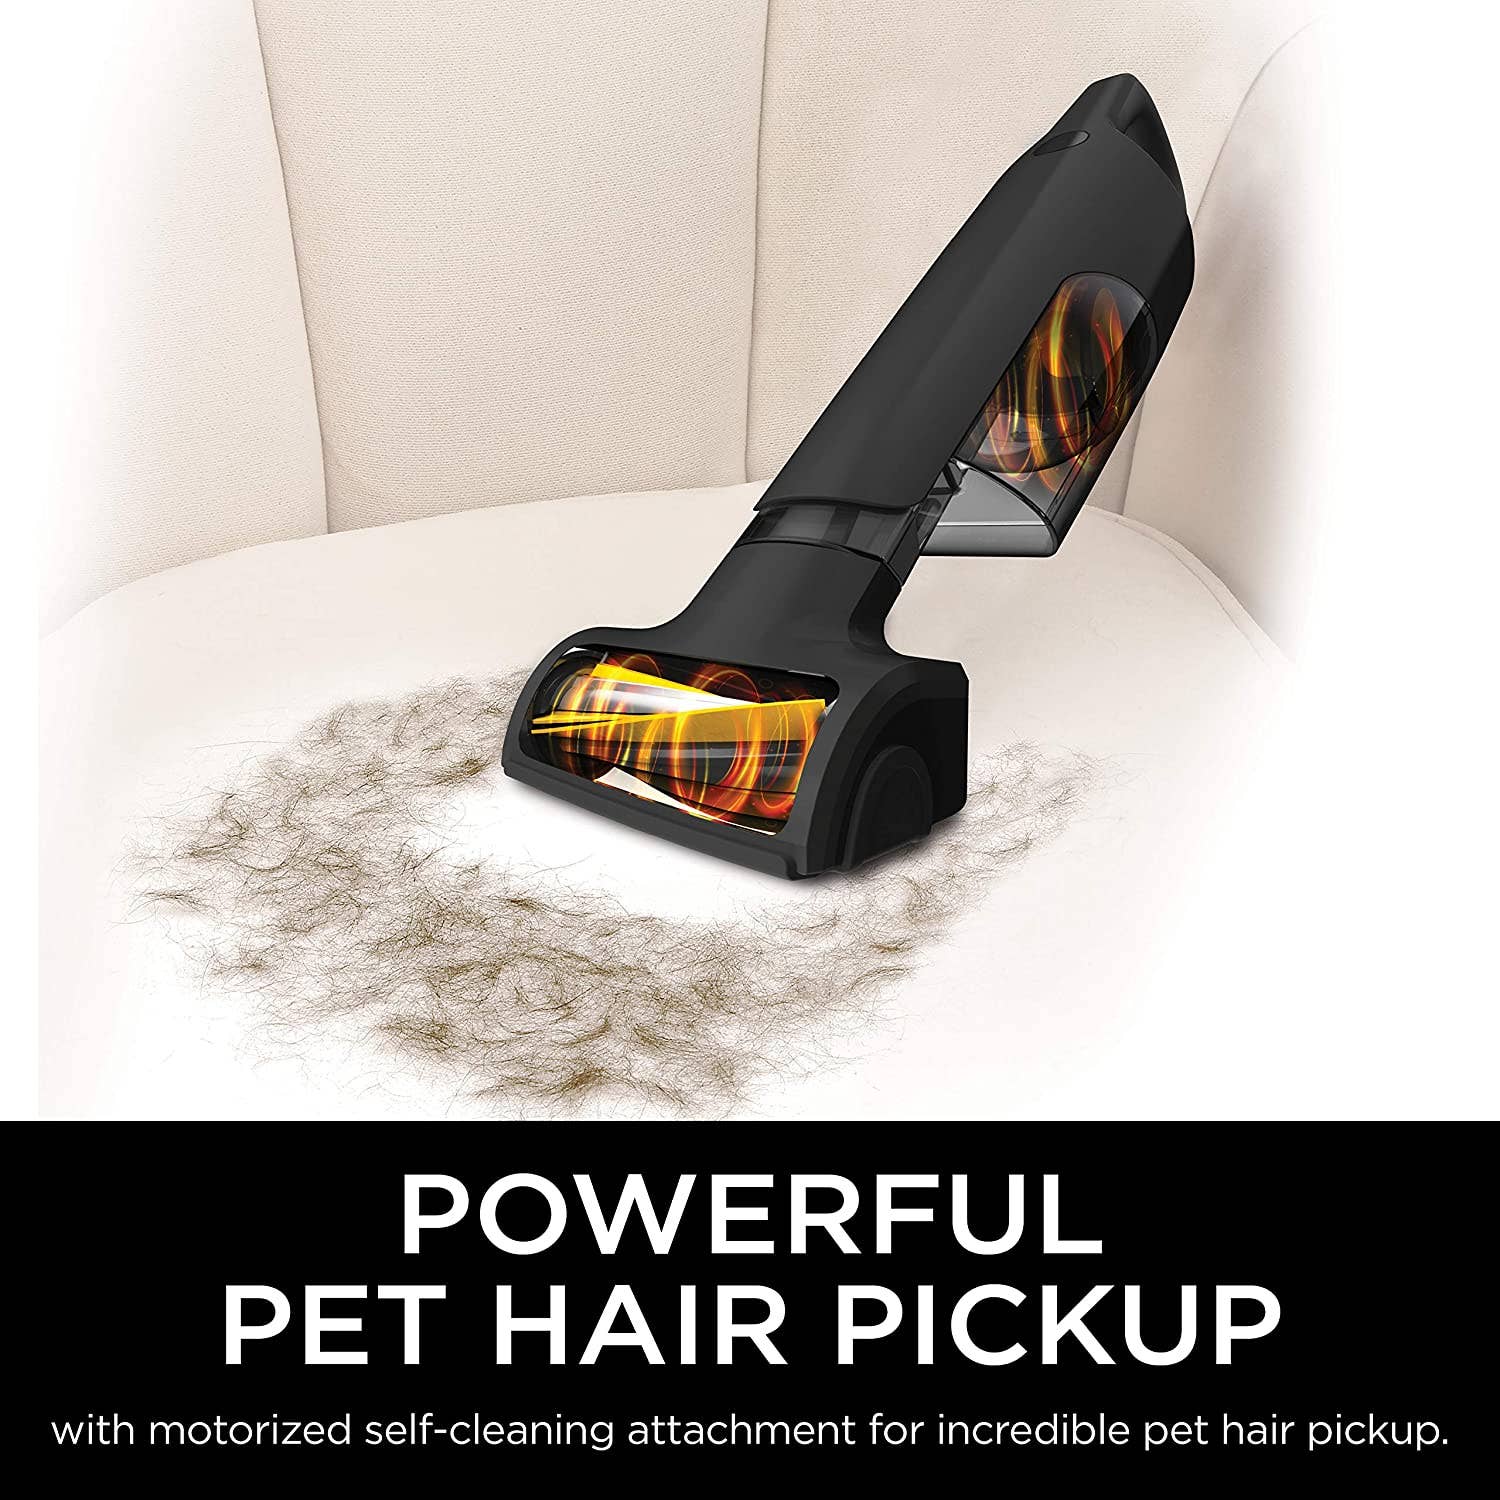 Shark - UltraCyclone Pet Pro+ CH951 Cordless Hand Vac with Self-Cleaning Pet Power Brush - Black